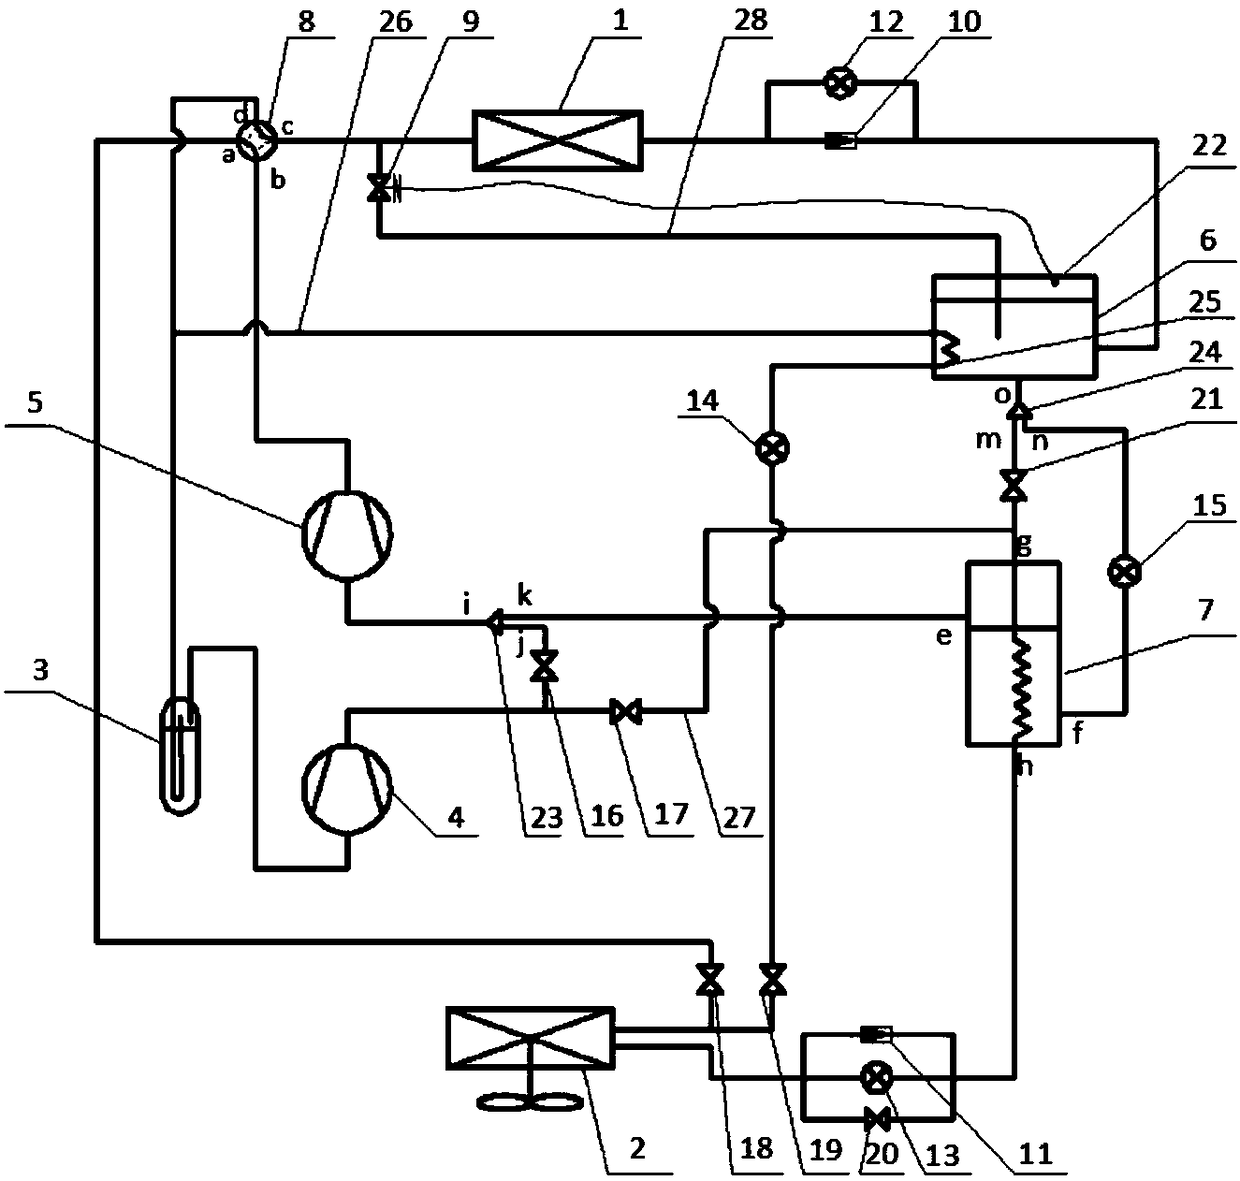 An air source heat pump defrosting system with two-stage compression switched to partial binary cascade